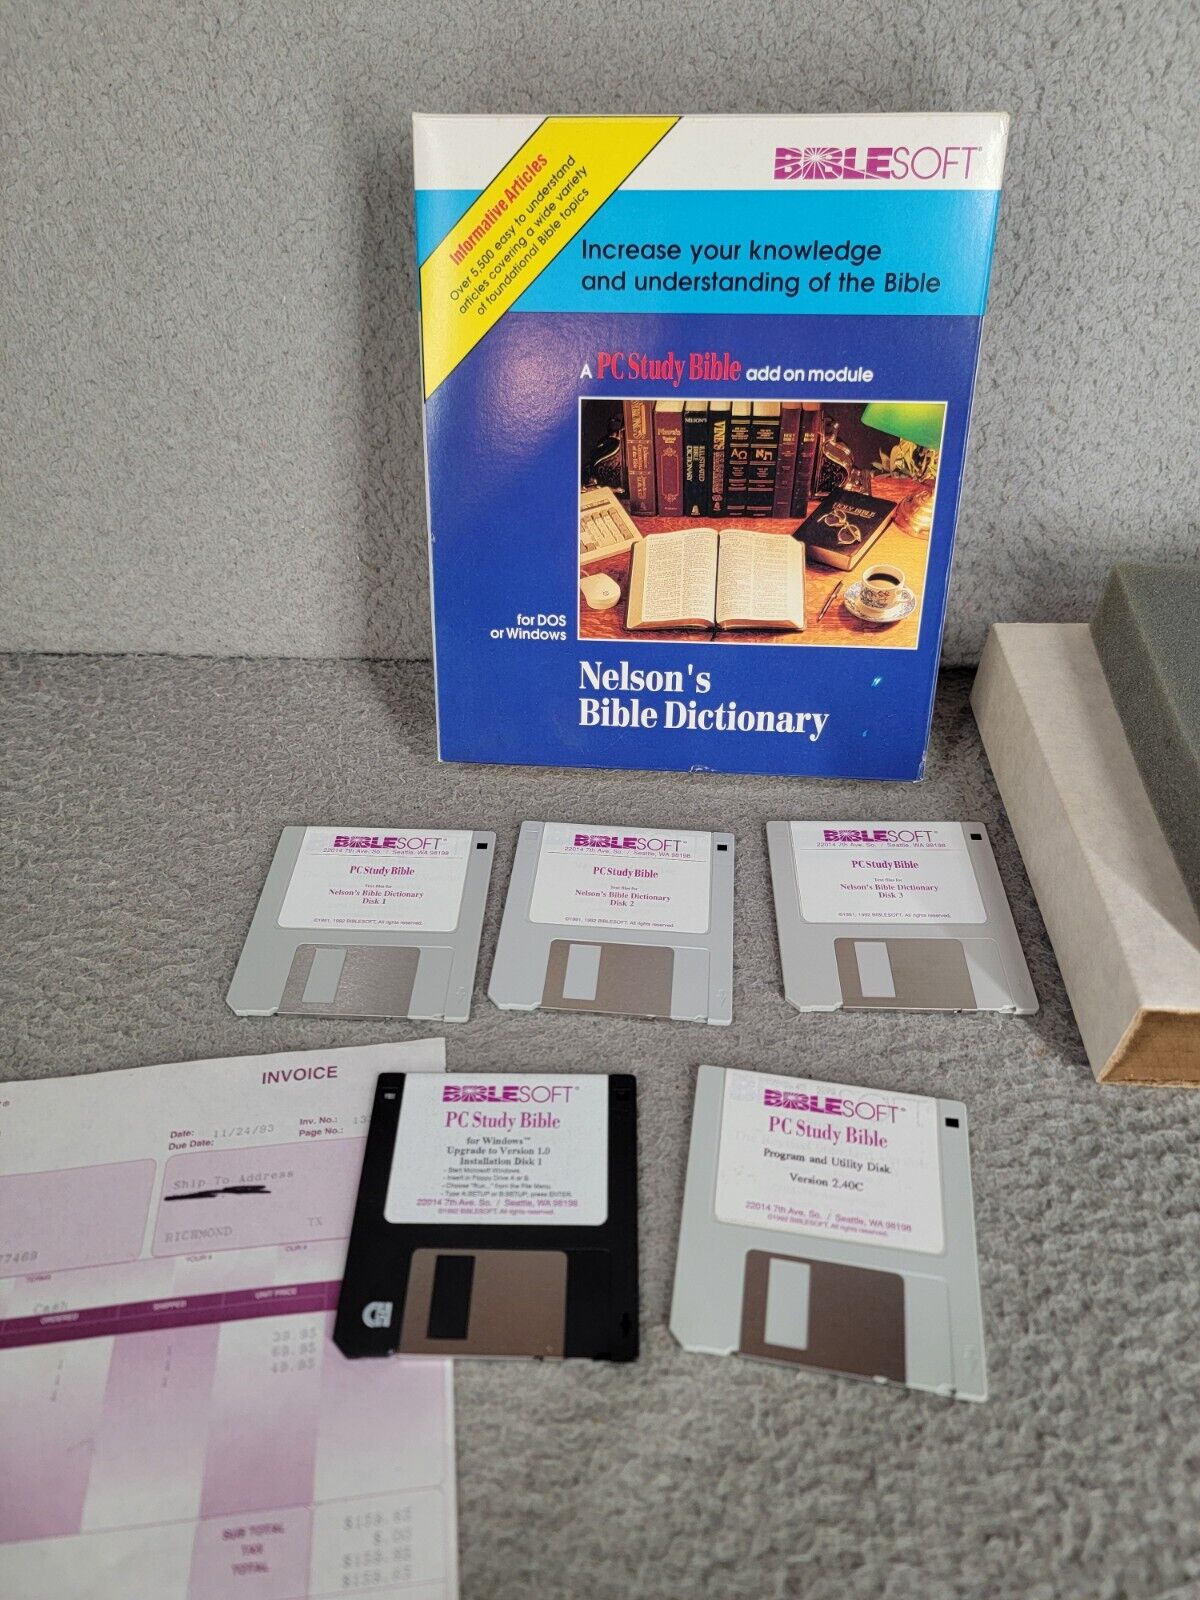 Biblesoft PC Study Bible Add On Module For DOS Or Windows 1993 Vintage